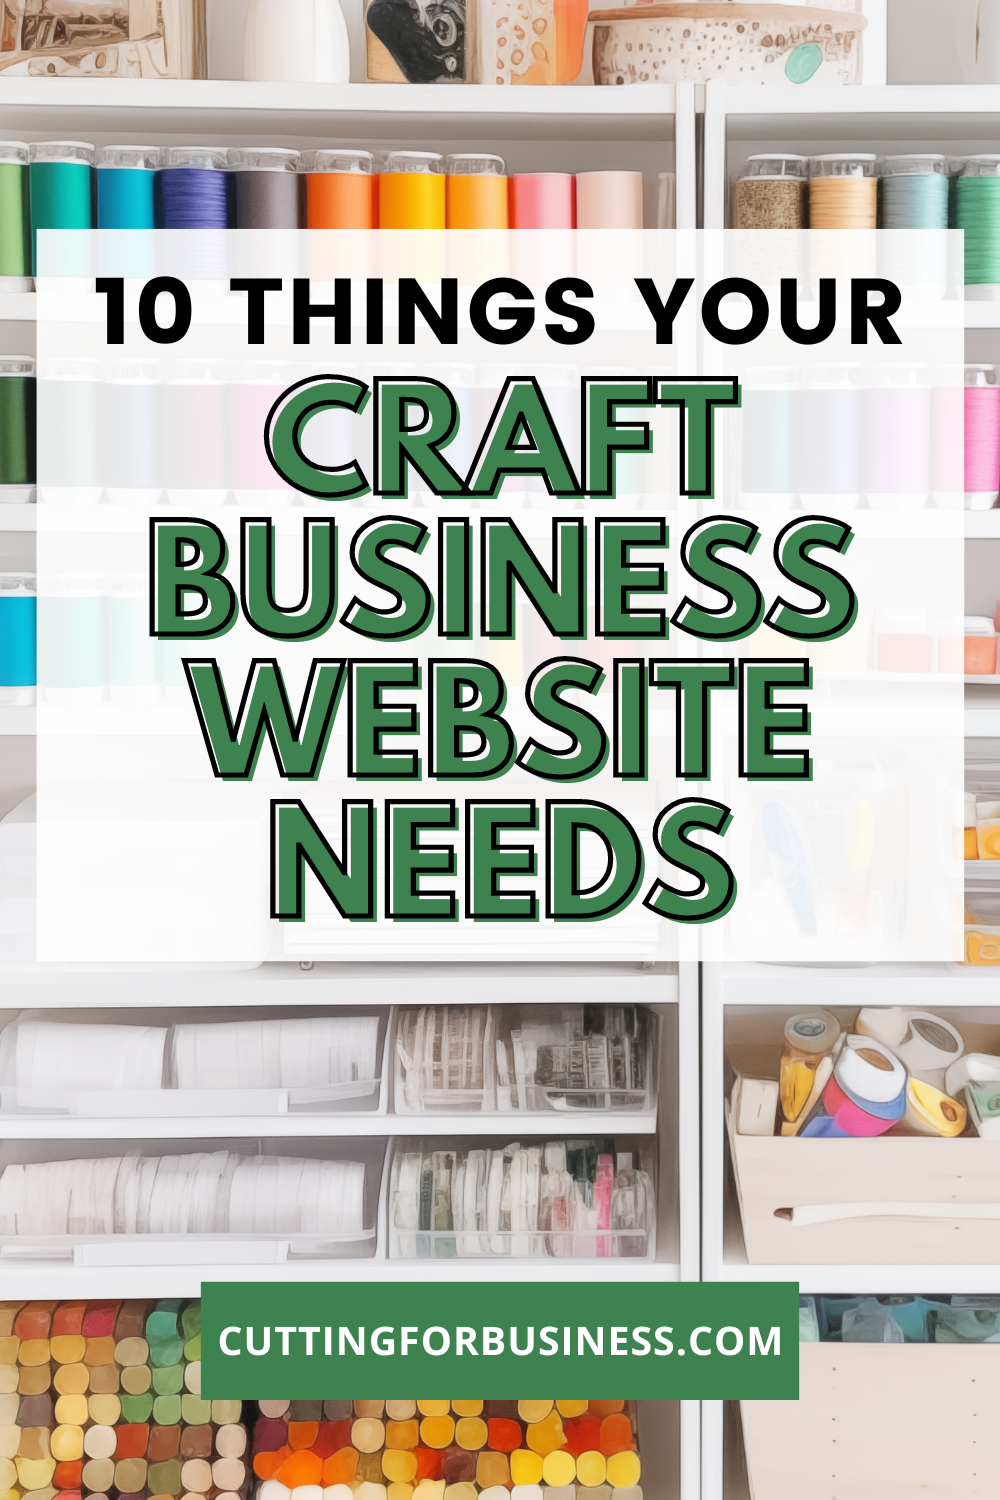 10 Things Your Craft Business Website Needs - cuttingforbusiness.com